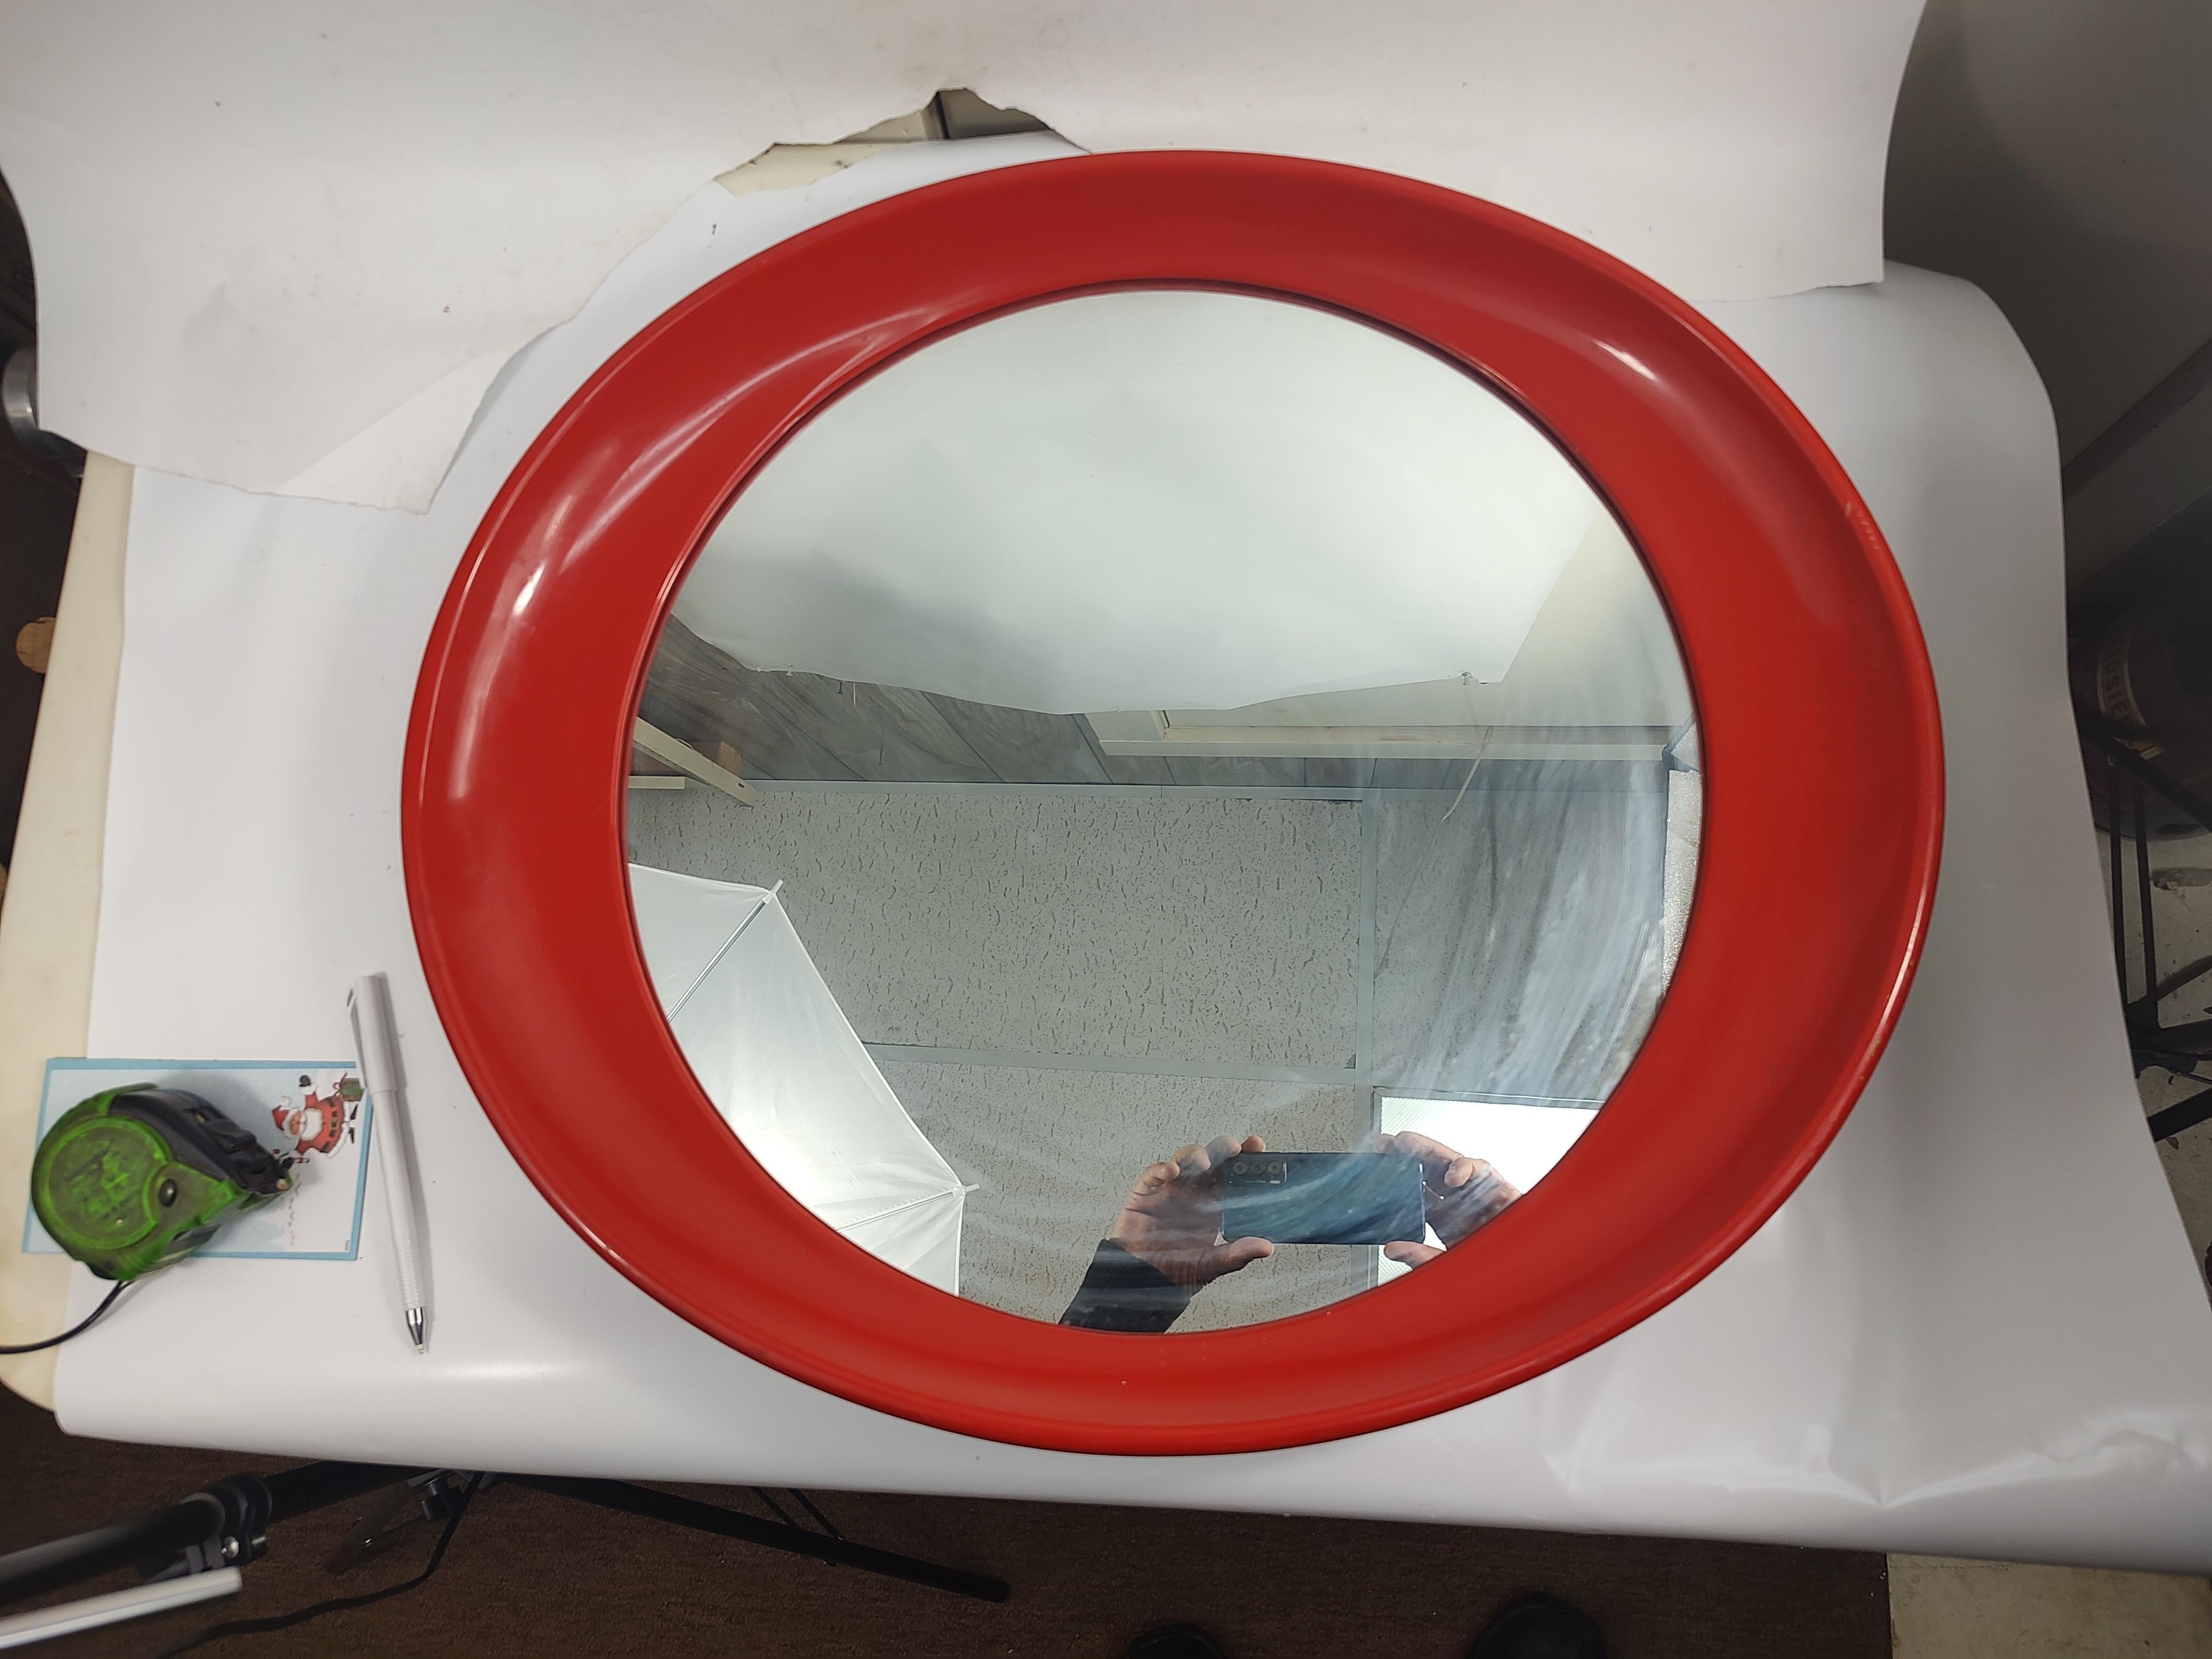 Fabulous Italian Red plastic oval mirror attributed to Joe Colombo c 1969. In excellent vintage condition with minimal wear. Mirror is excellent with no age related aging. 25.5 x 22 x 2.5d